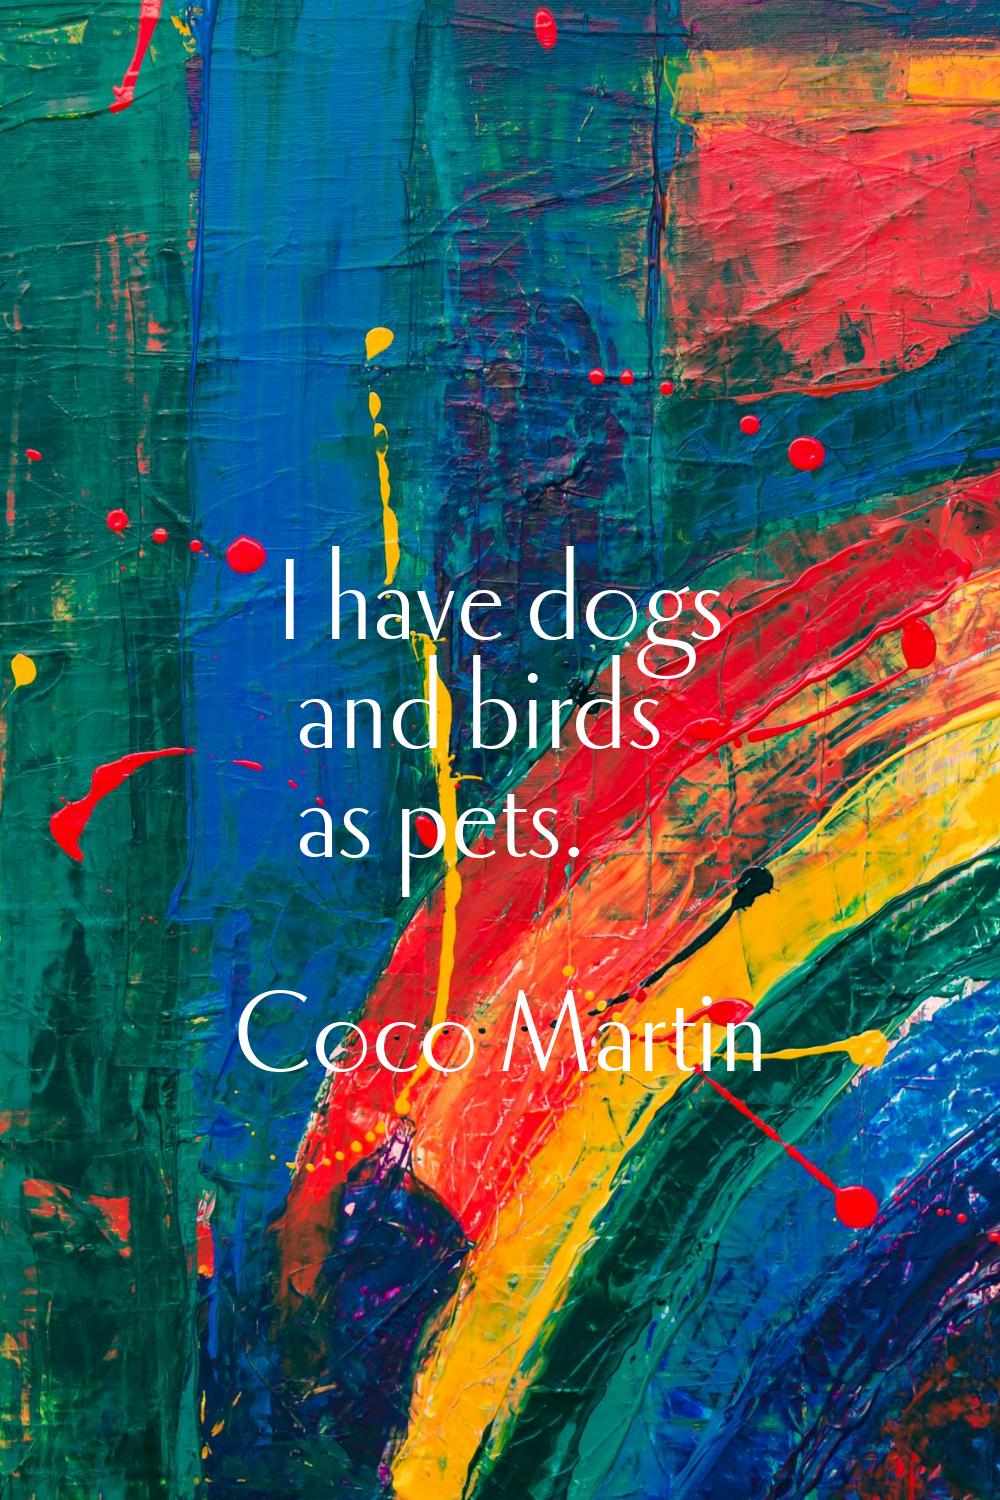 I have dogs and birds as pets.